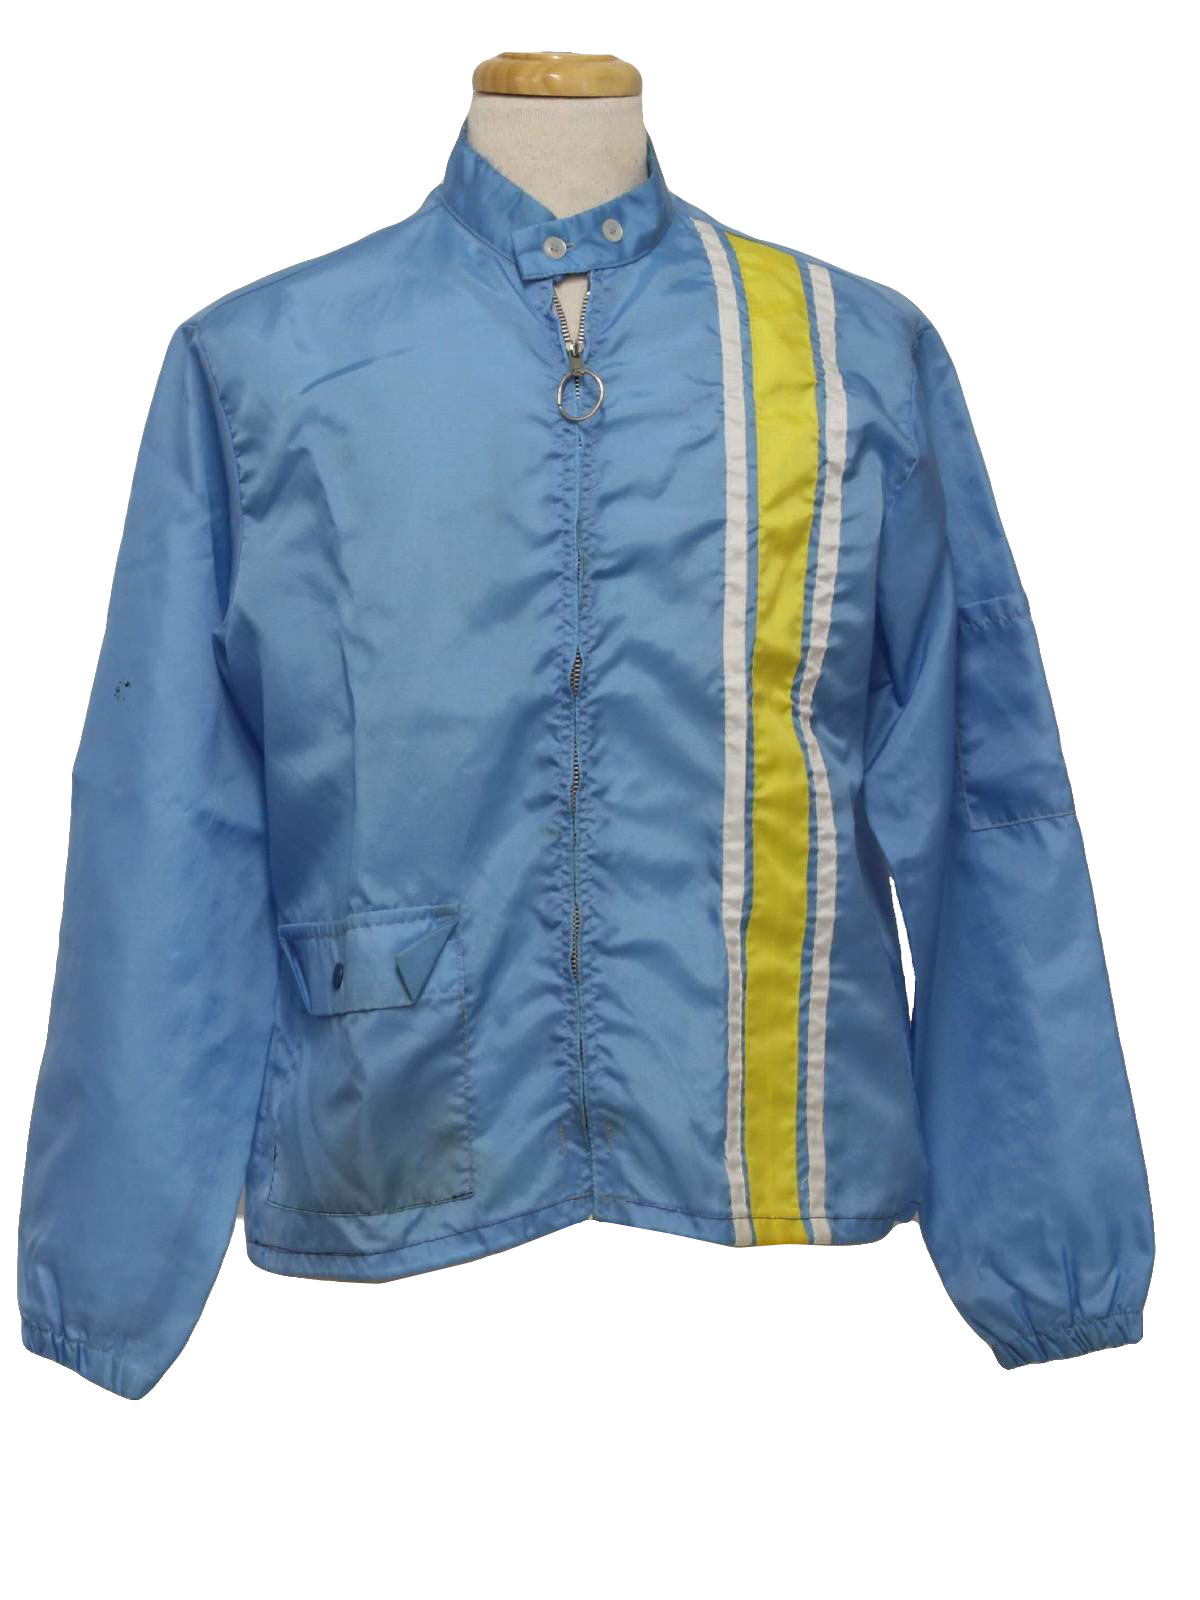 1970s Vintage Jacket: 70s -Swingster- Mens sky blue, white and yellow ...